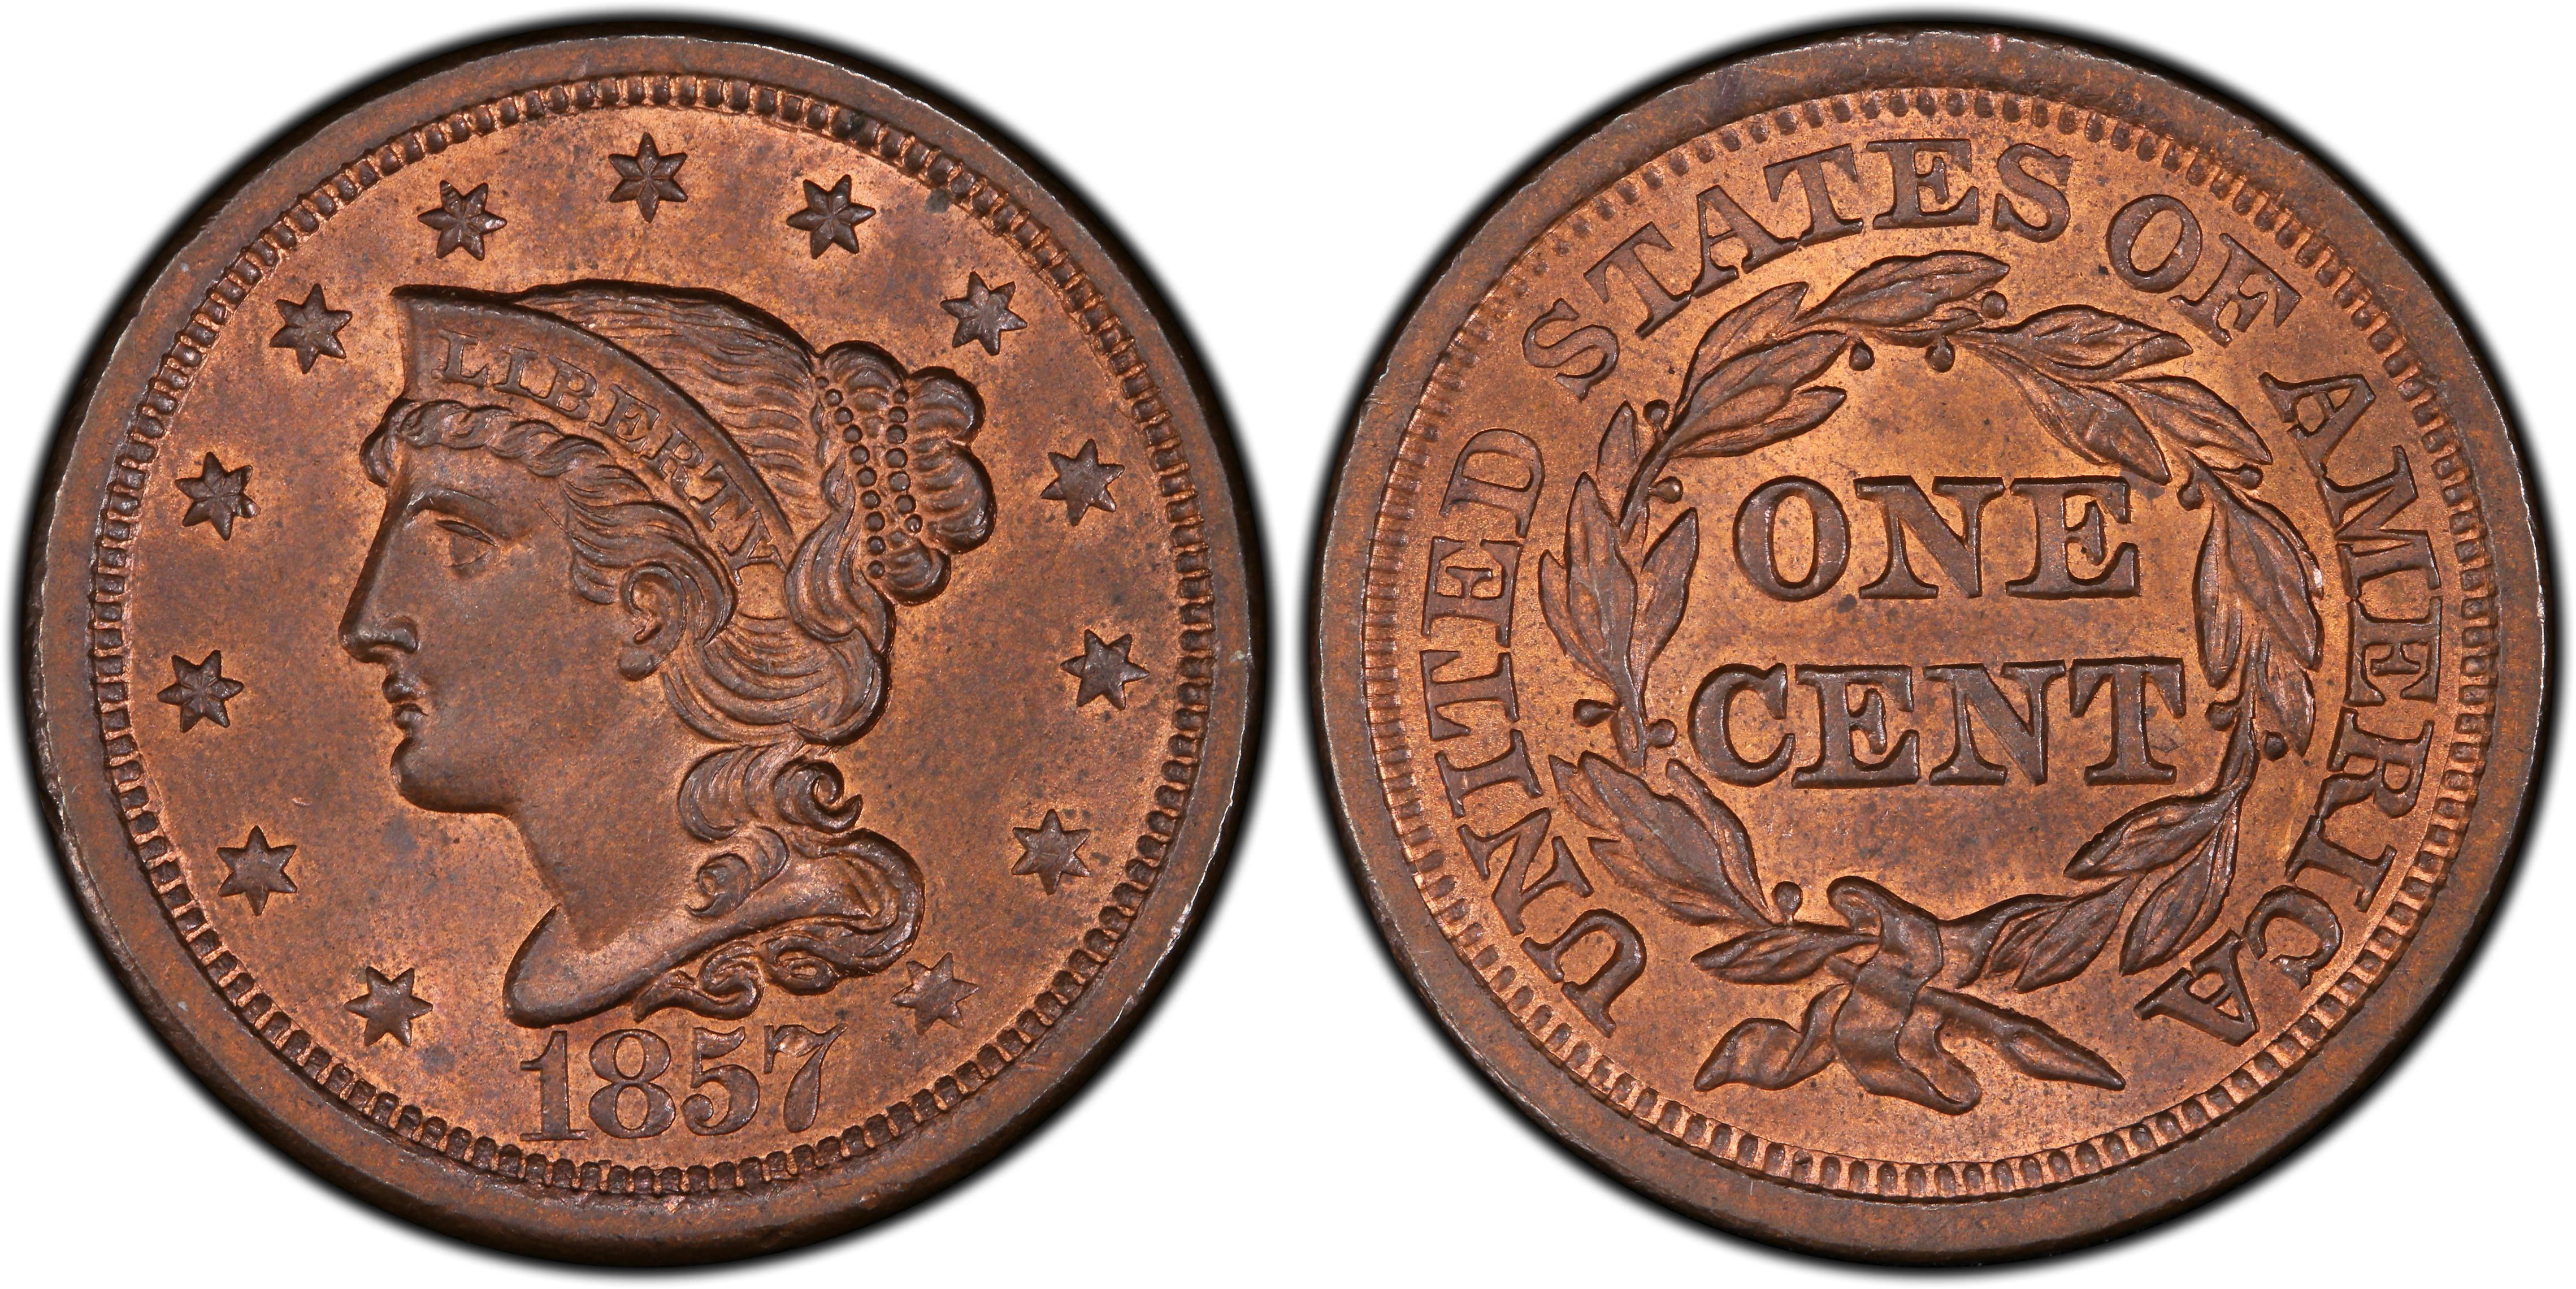 1857 1C N-1 Large Date, RB (Regular Strike) Braided Hair Cent - PCGS  CoinFacts